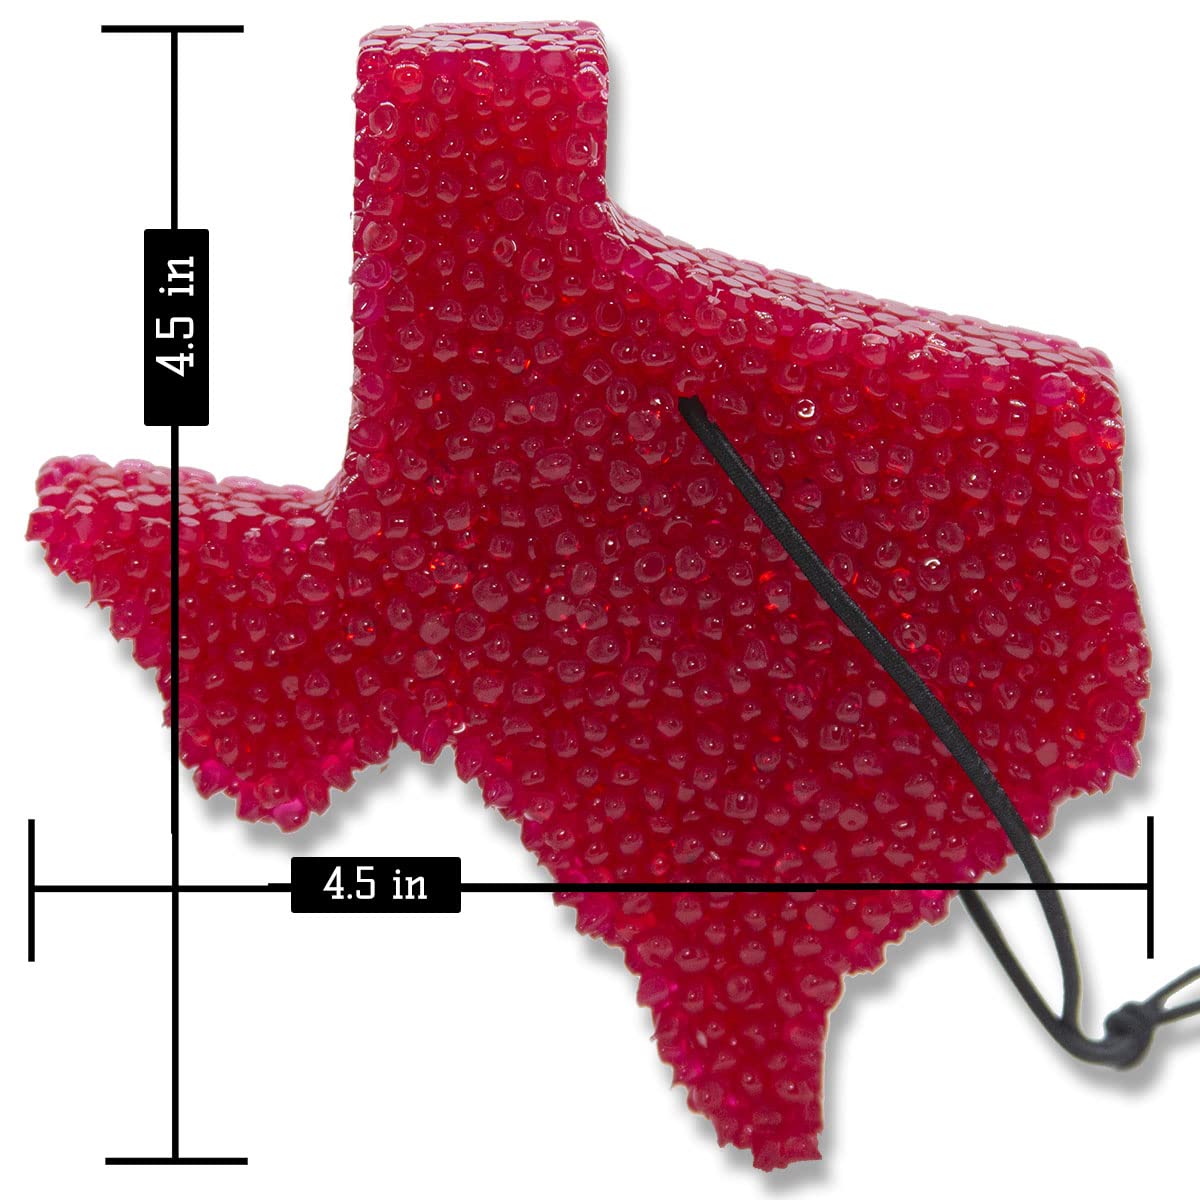 Strawberry Leather, Lone Star Candles & More’s Premium Strongly Scented Freshies, Genuine Leather with Sweet & Juicy Strawberries, Car & Air Freshener, USA Made in Texas, Strawberry Texas State 1-Pack